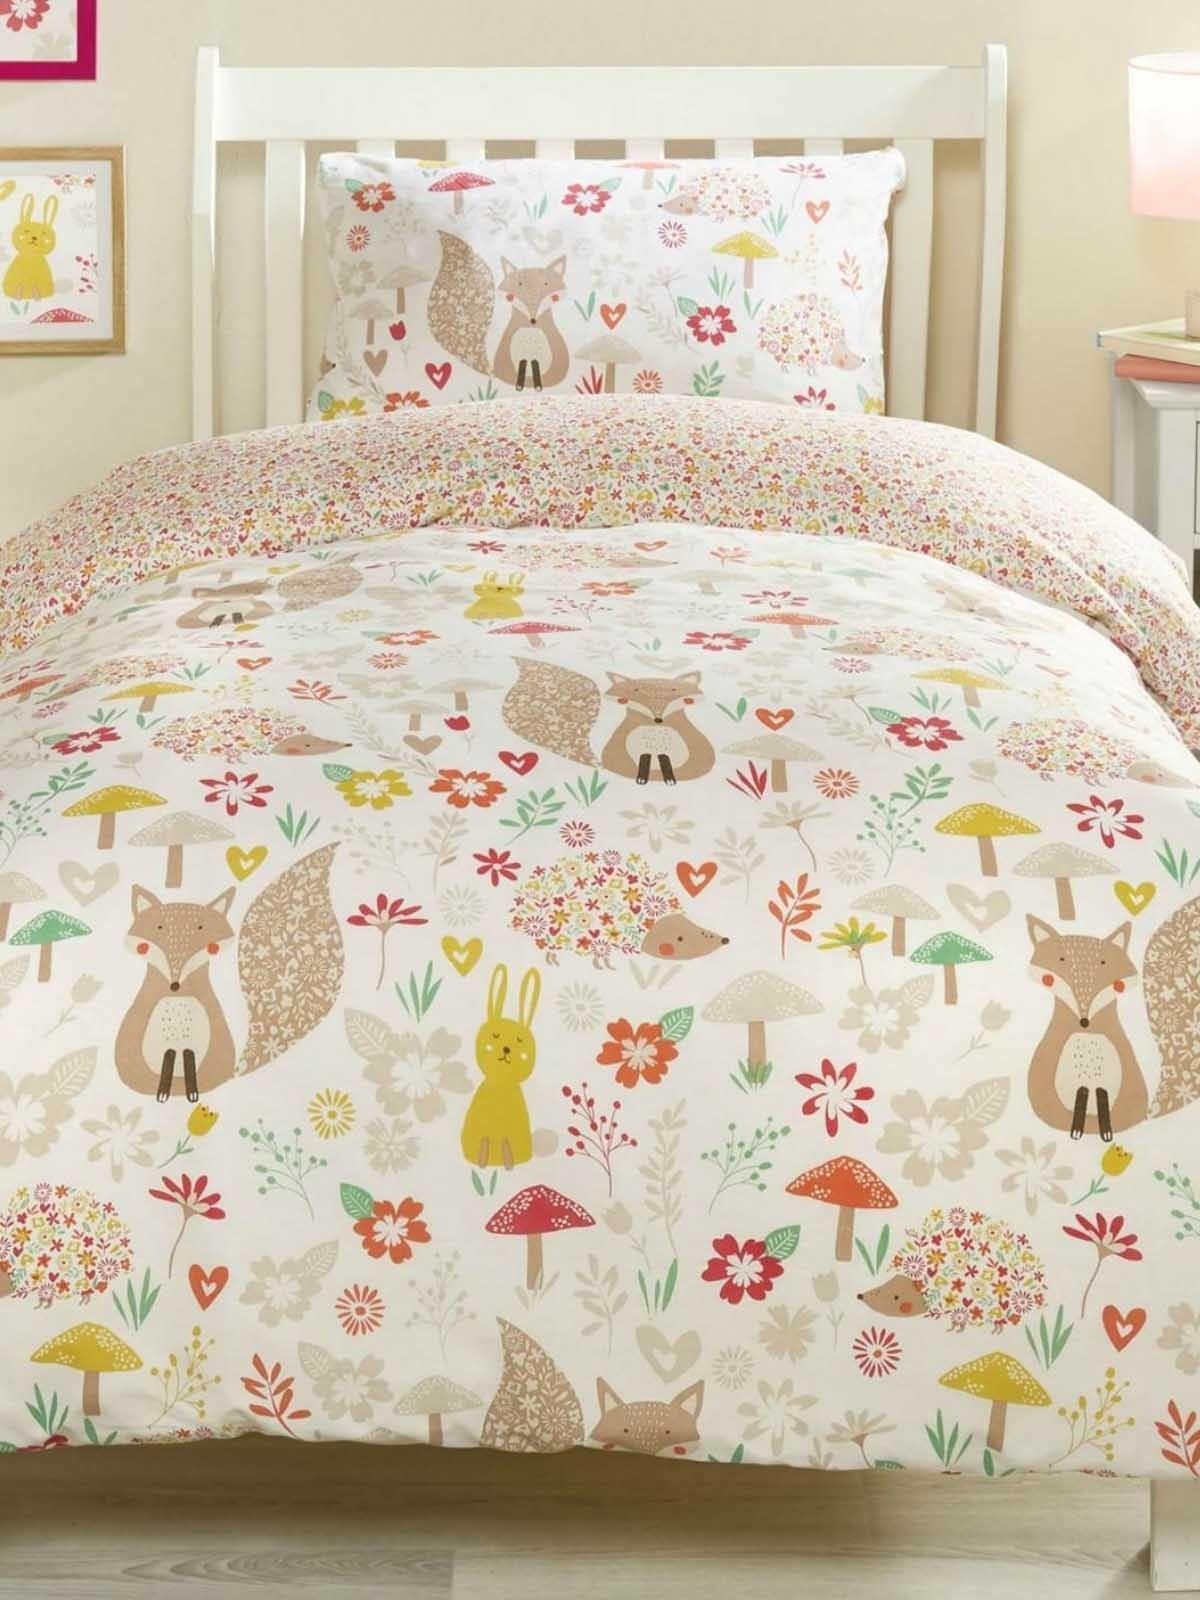 childrens duvet and curtain sets